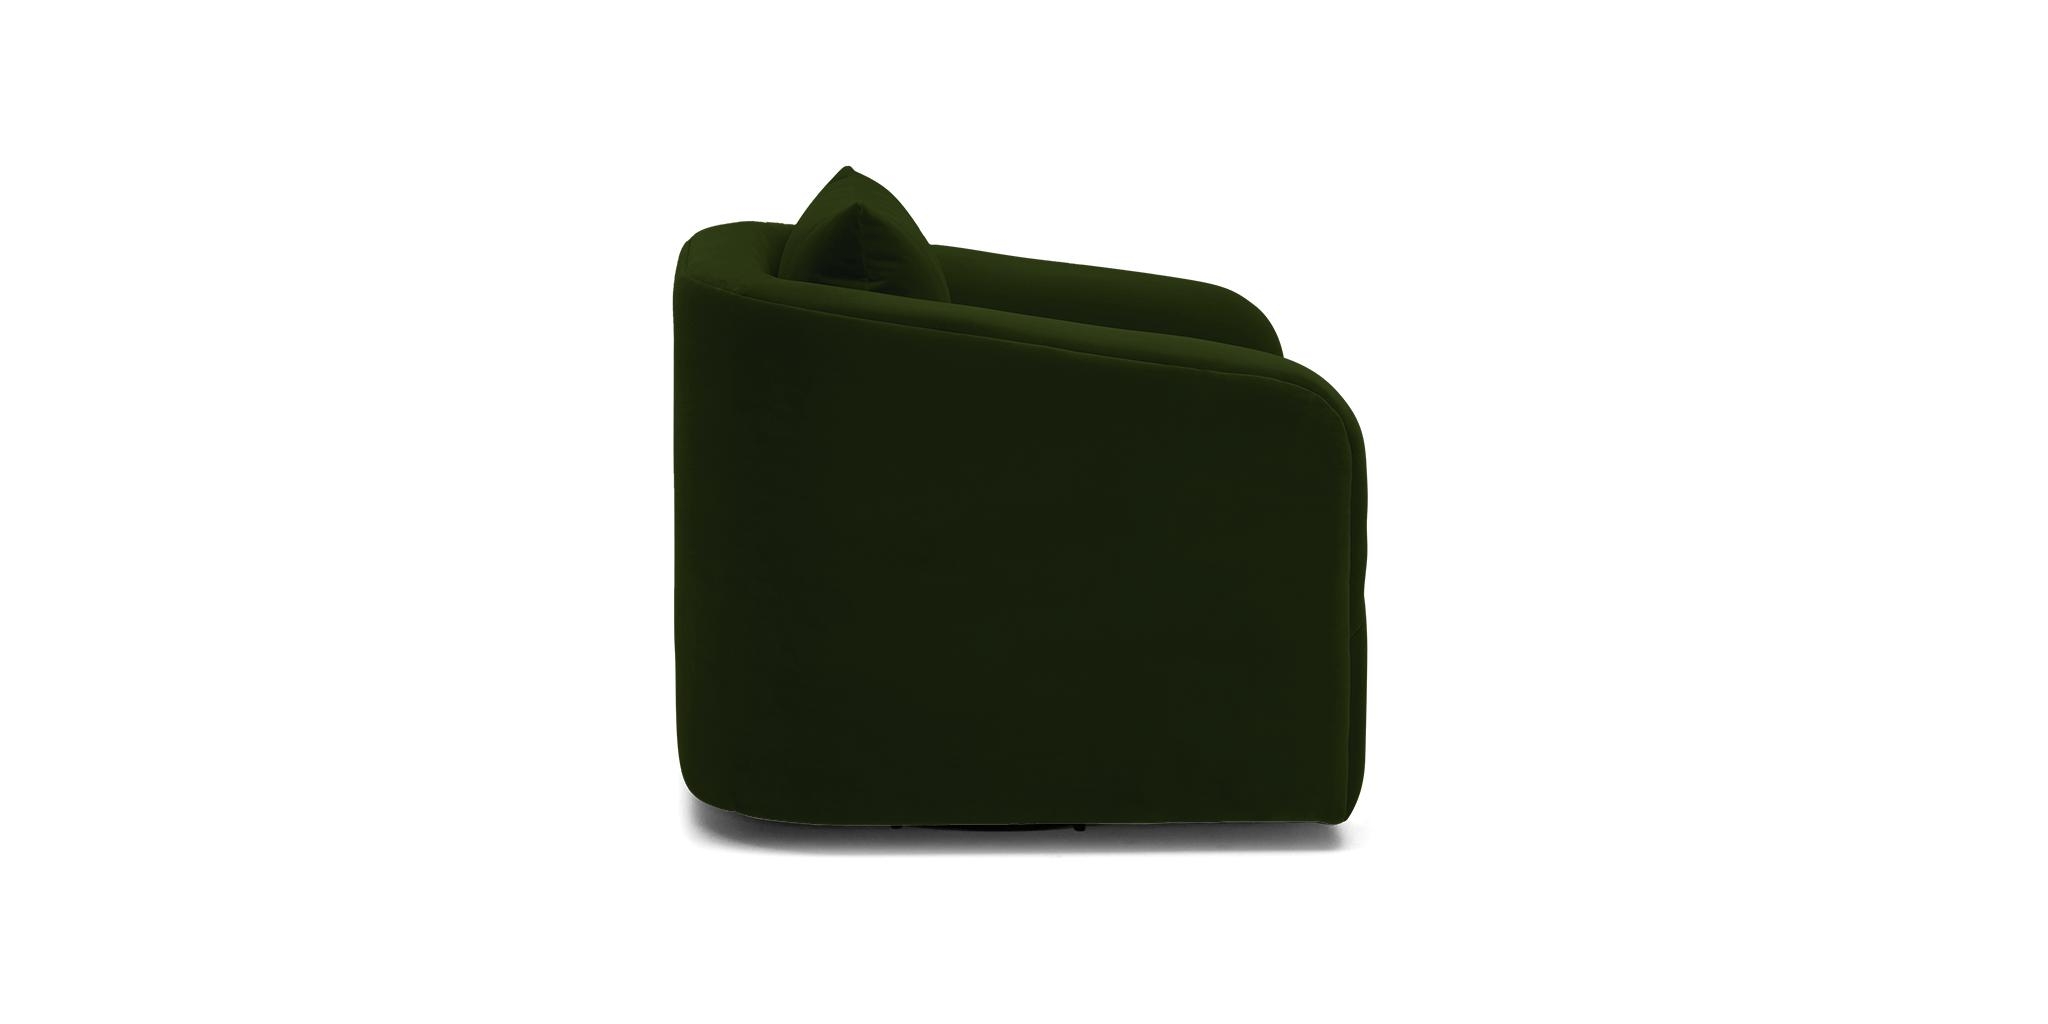 Green Amelia Mid Century Modern Swivel Chair - Royale Forest - Image 2